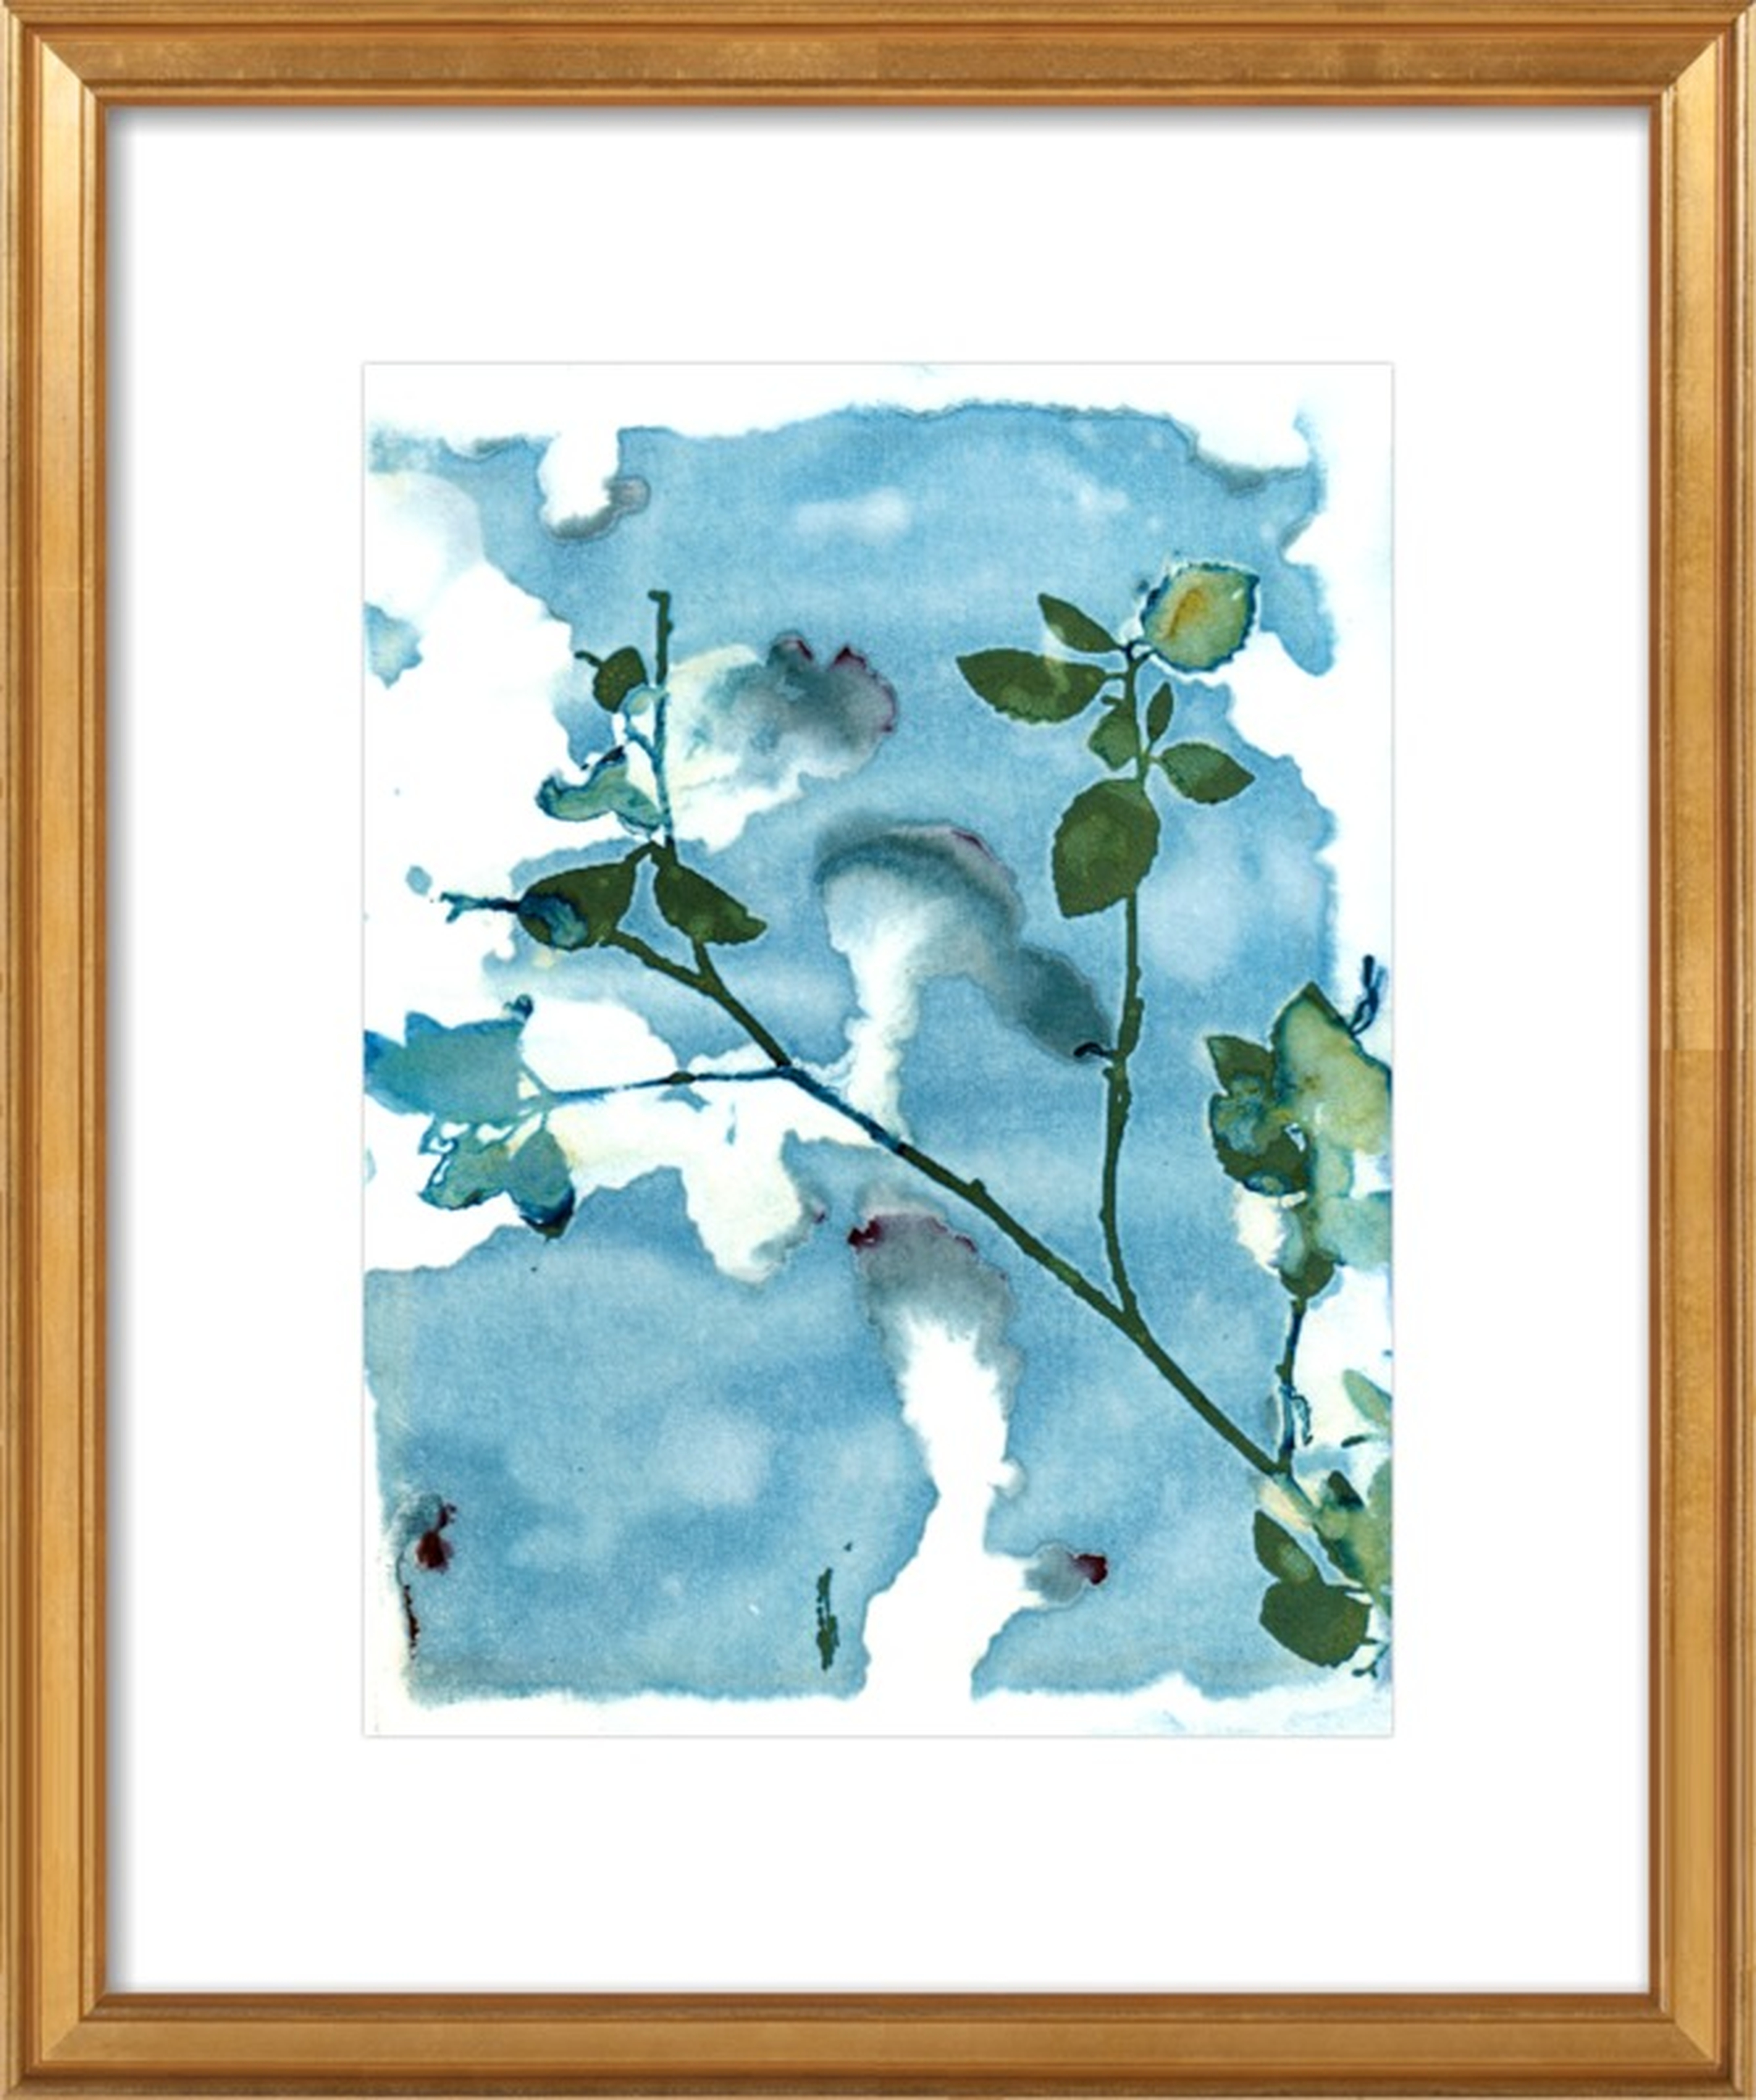 Leaves And Sky by Krista McCurdy for Artfully Walls - Artfully Walls